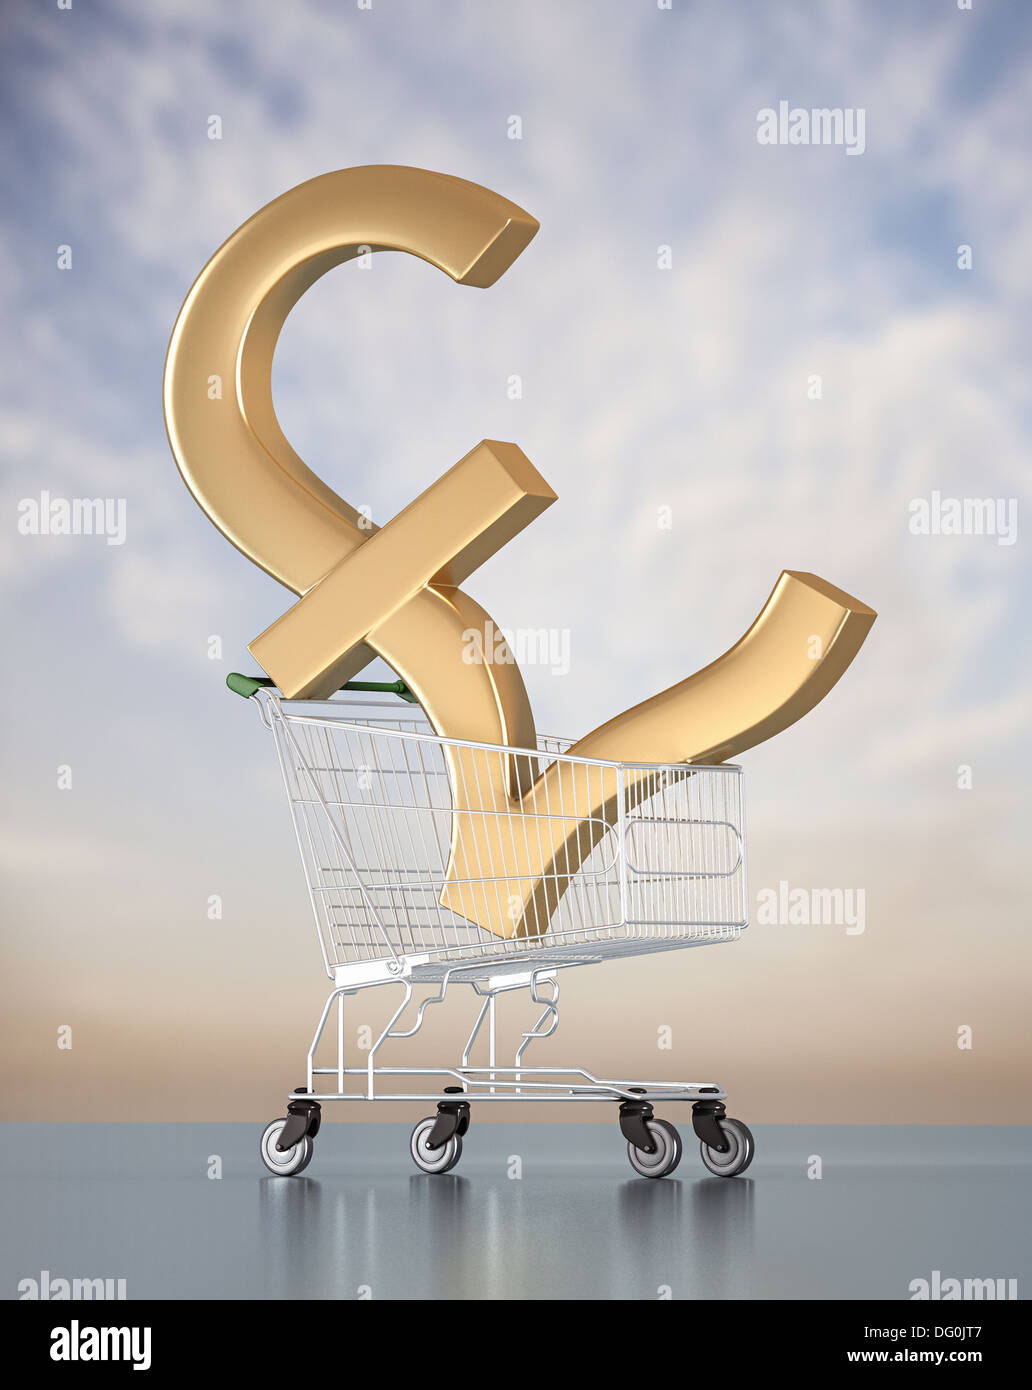 A Golden Pound Sterling in a trolley against a blue sky with clouds Stock Photo